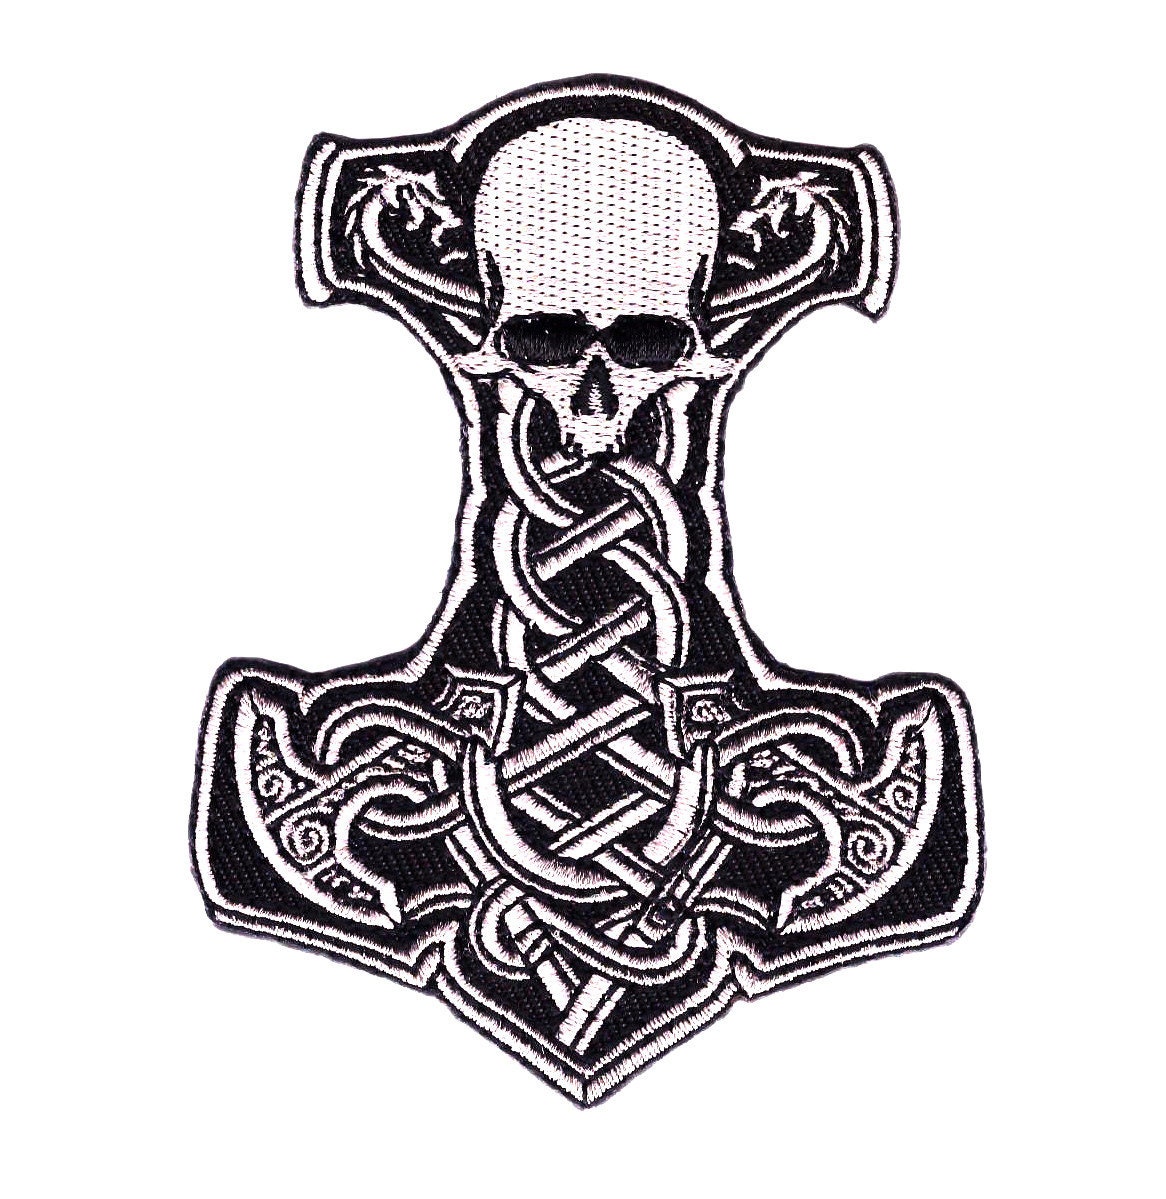 2AFTER1 Sleipnir Horse Odin God Norse Asgard Viking Valhalla Morale Tactical Embroidery Fastener Patch 